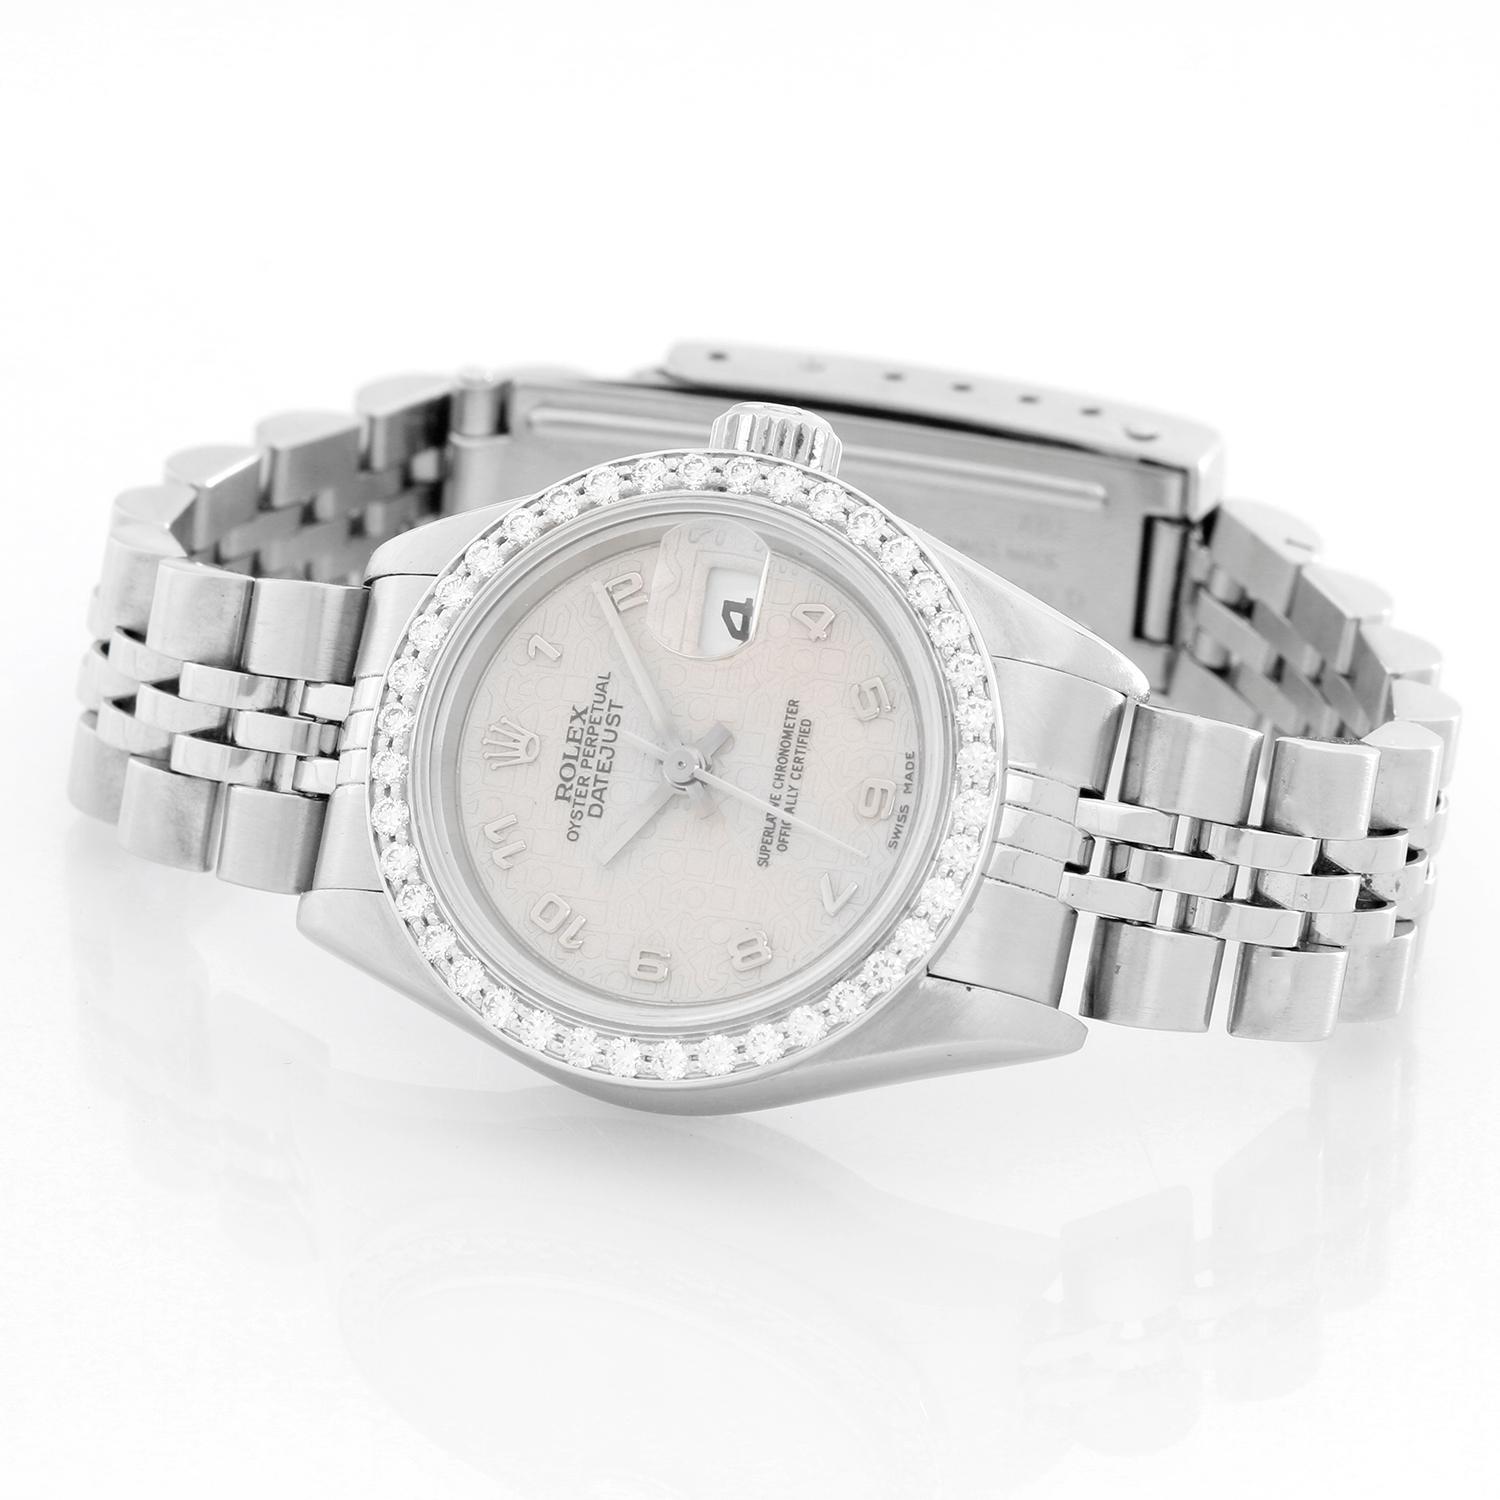 Ladies Rolex Datejust Stainless Steel Watch 79174 - Automatic winding, 31 jewels, quickset, sapphire crystal. Stainless steel case with 18k white gold custom diamond bezel (26mm diameter). Factory cream Jubilee dial with Arabic numerals. Stainless